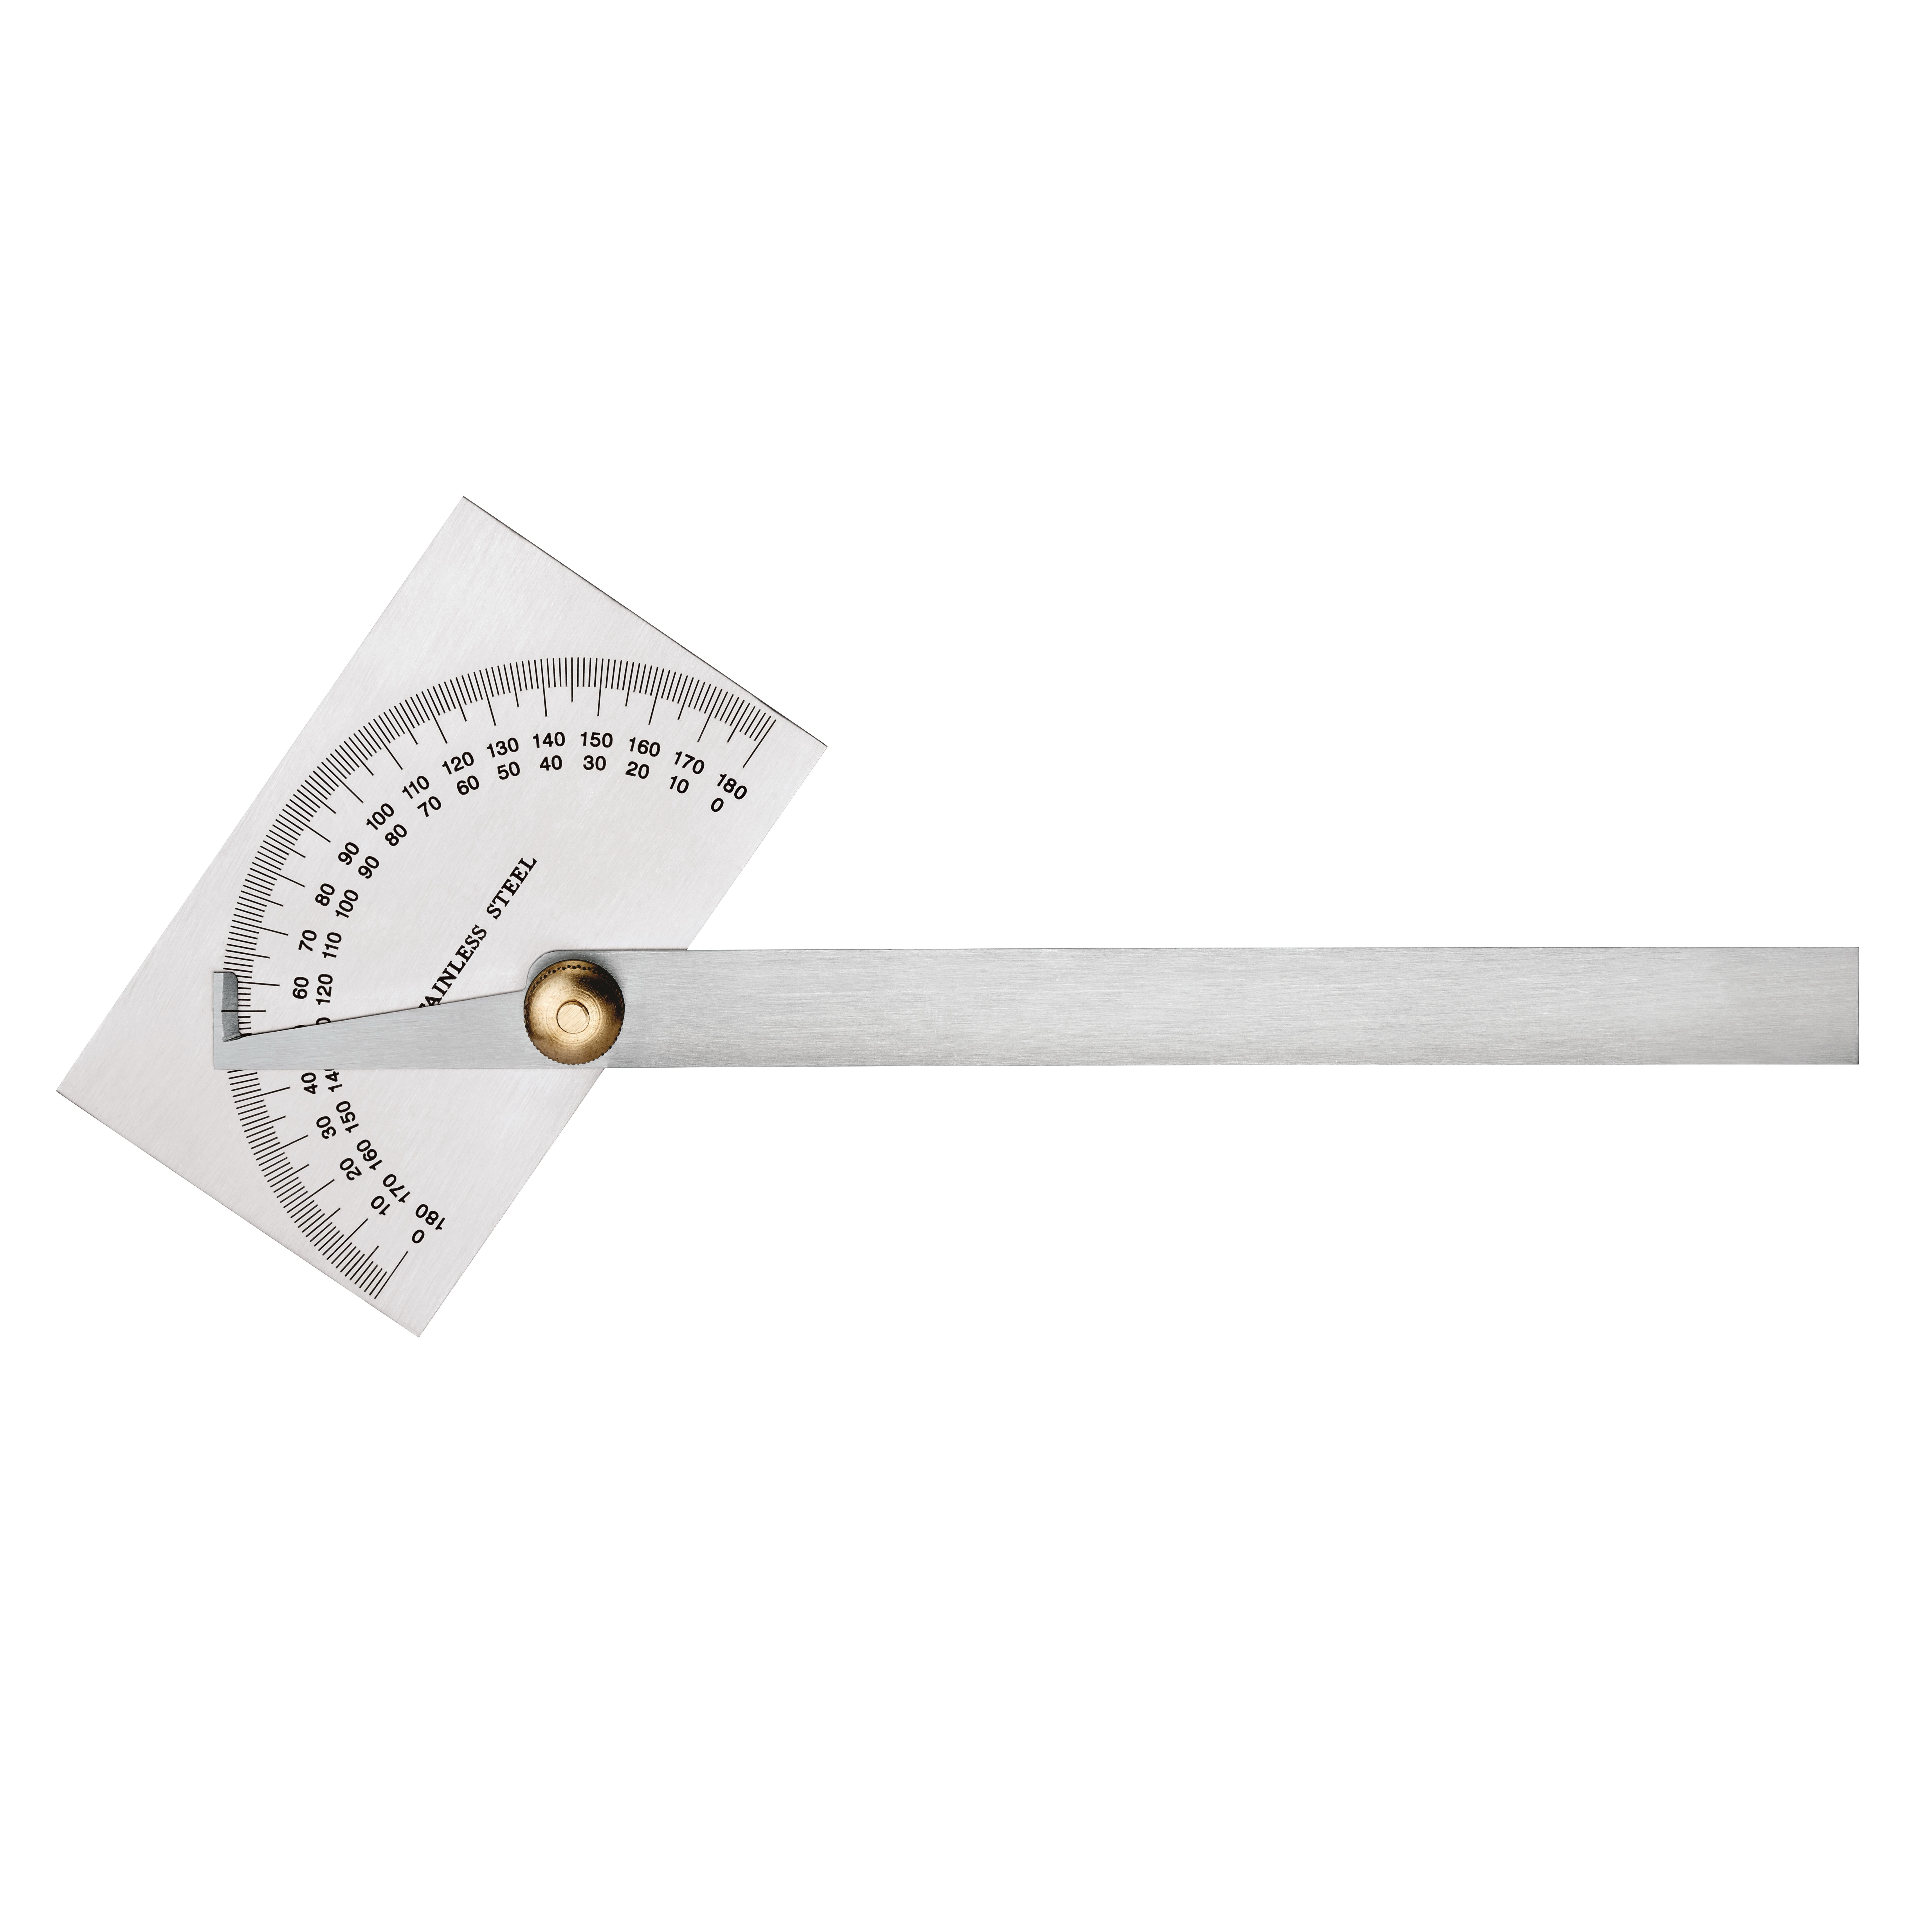 Empire® 27912 Protractor, 0 to 180 deg Measuring, 6 in L, Graduations 1/16 in, Stainless Steel